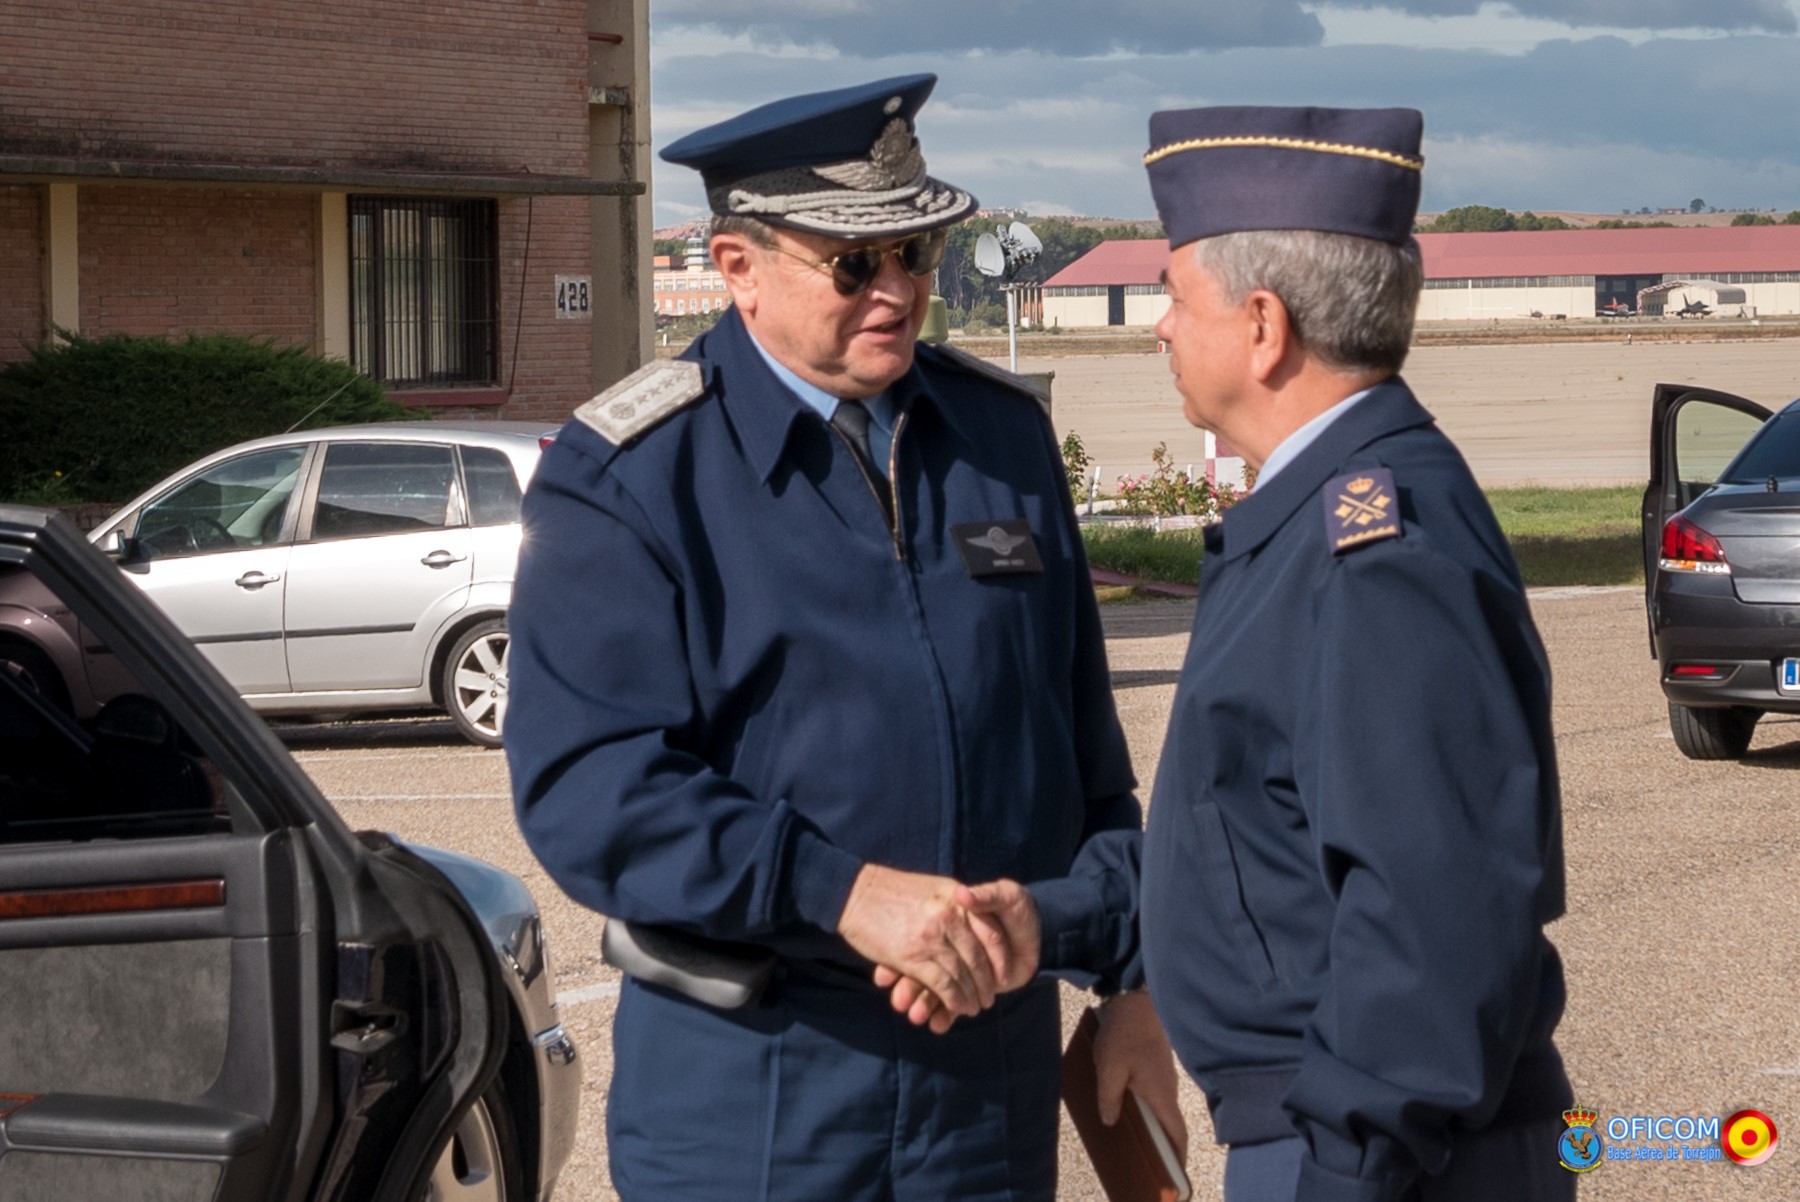 The Chief of the General Staff of the Argentinian Air Force visits the Combined Air Operations Centre in Torrejón